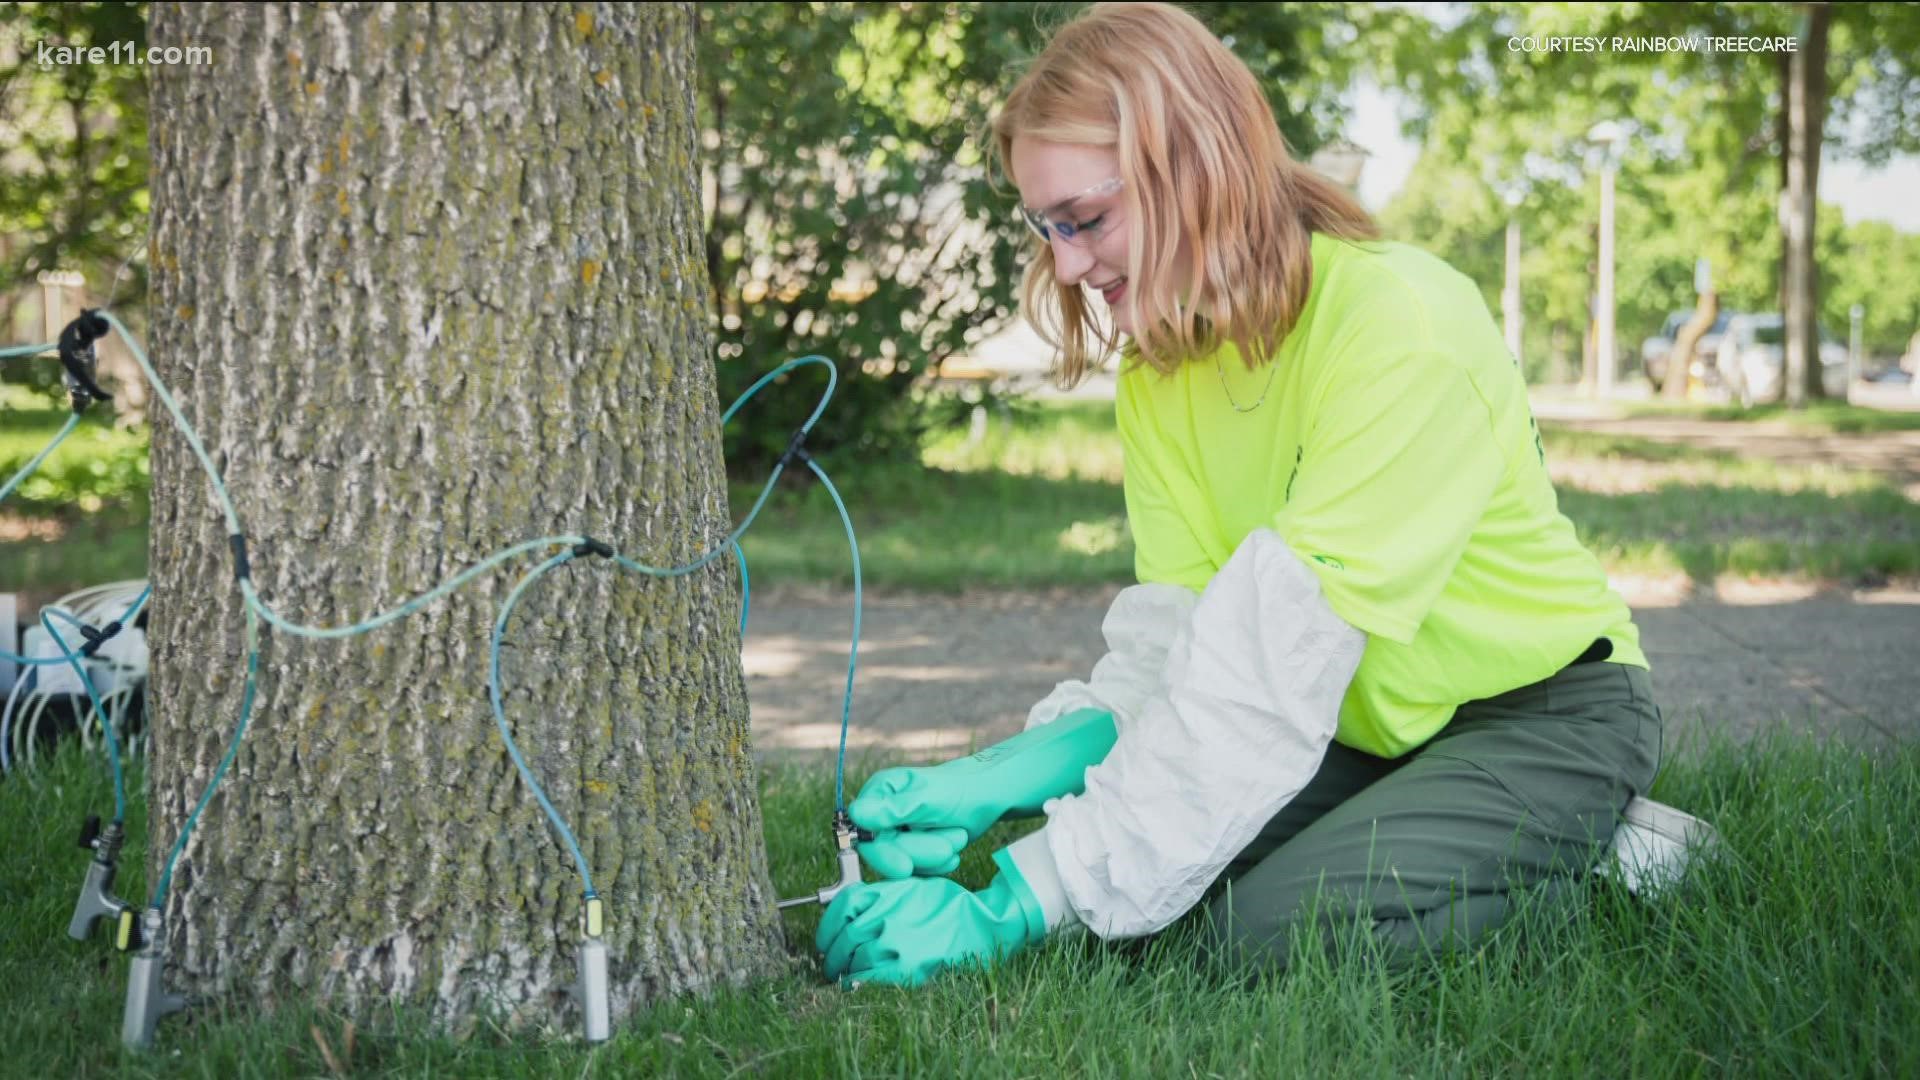 We've known for a long time that emerald ash borer has been a problem. Now is the time to decide to either save or cut down your ash trees